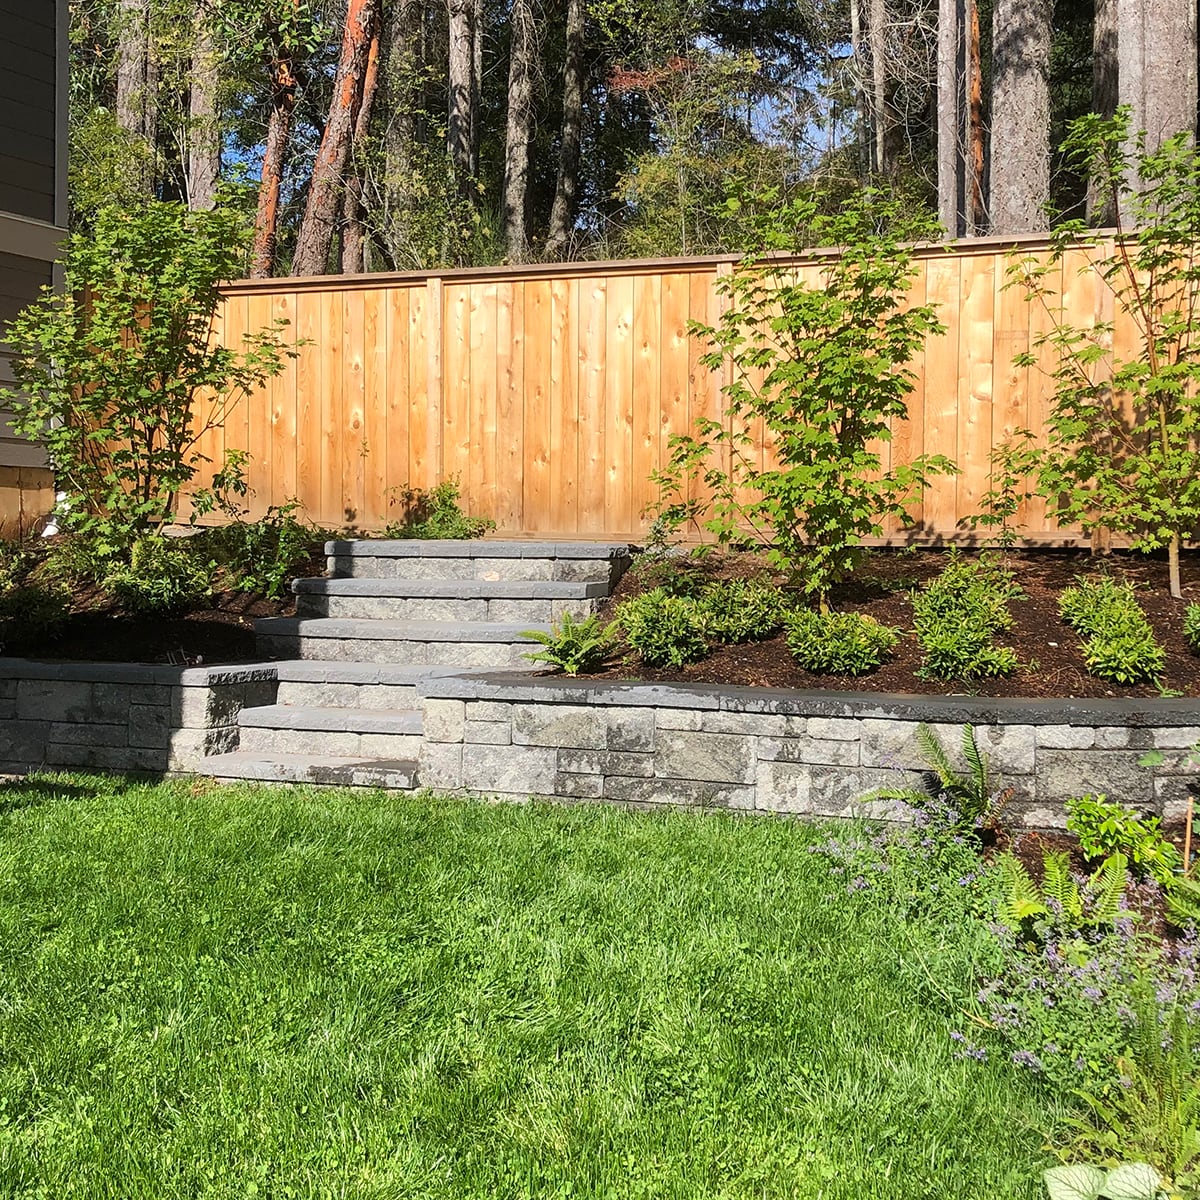 Stone retaining wall and a new wooden fence with green grass in the back yard of Tanglewood Counselling, with blue ocean and a pink sky in the background